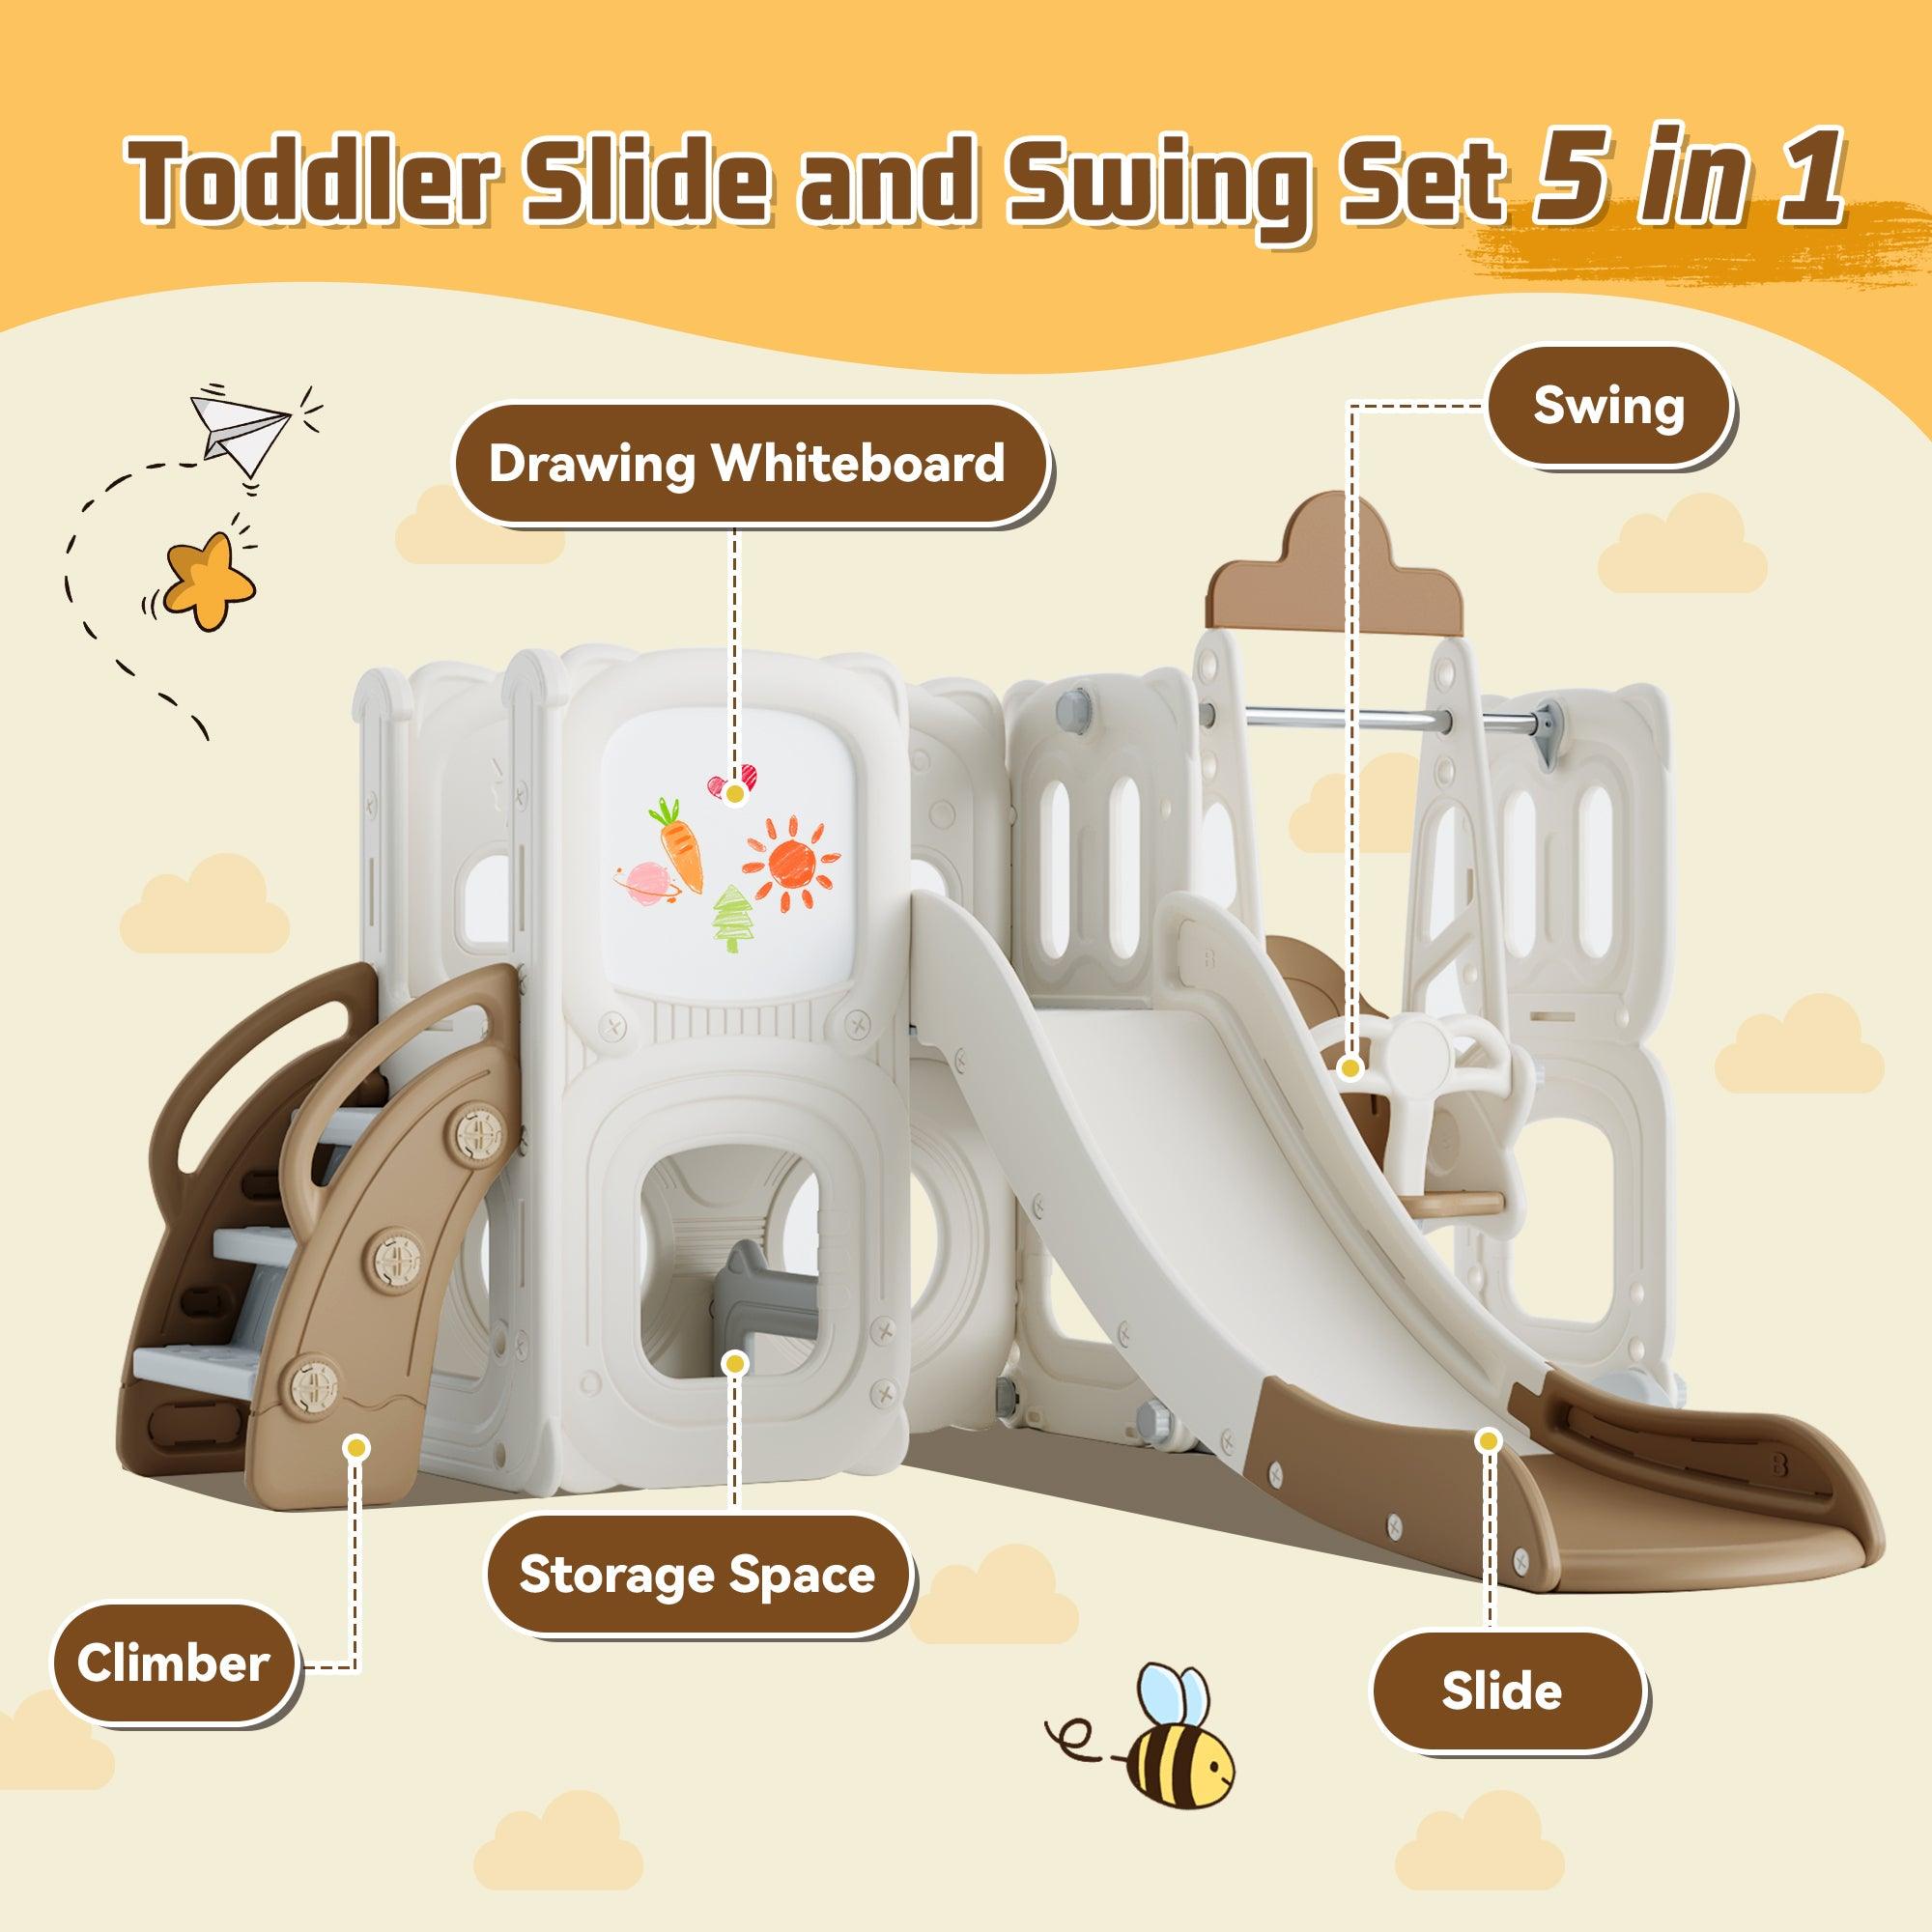 🆓🚛 5 in 1 Toddler Slide & Swing Set, Kids Playground Climber Slide Playset With Drawing Whiteboard for Babies, Coffee